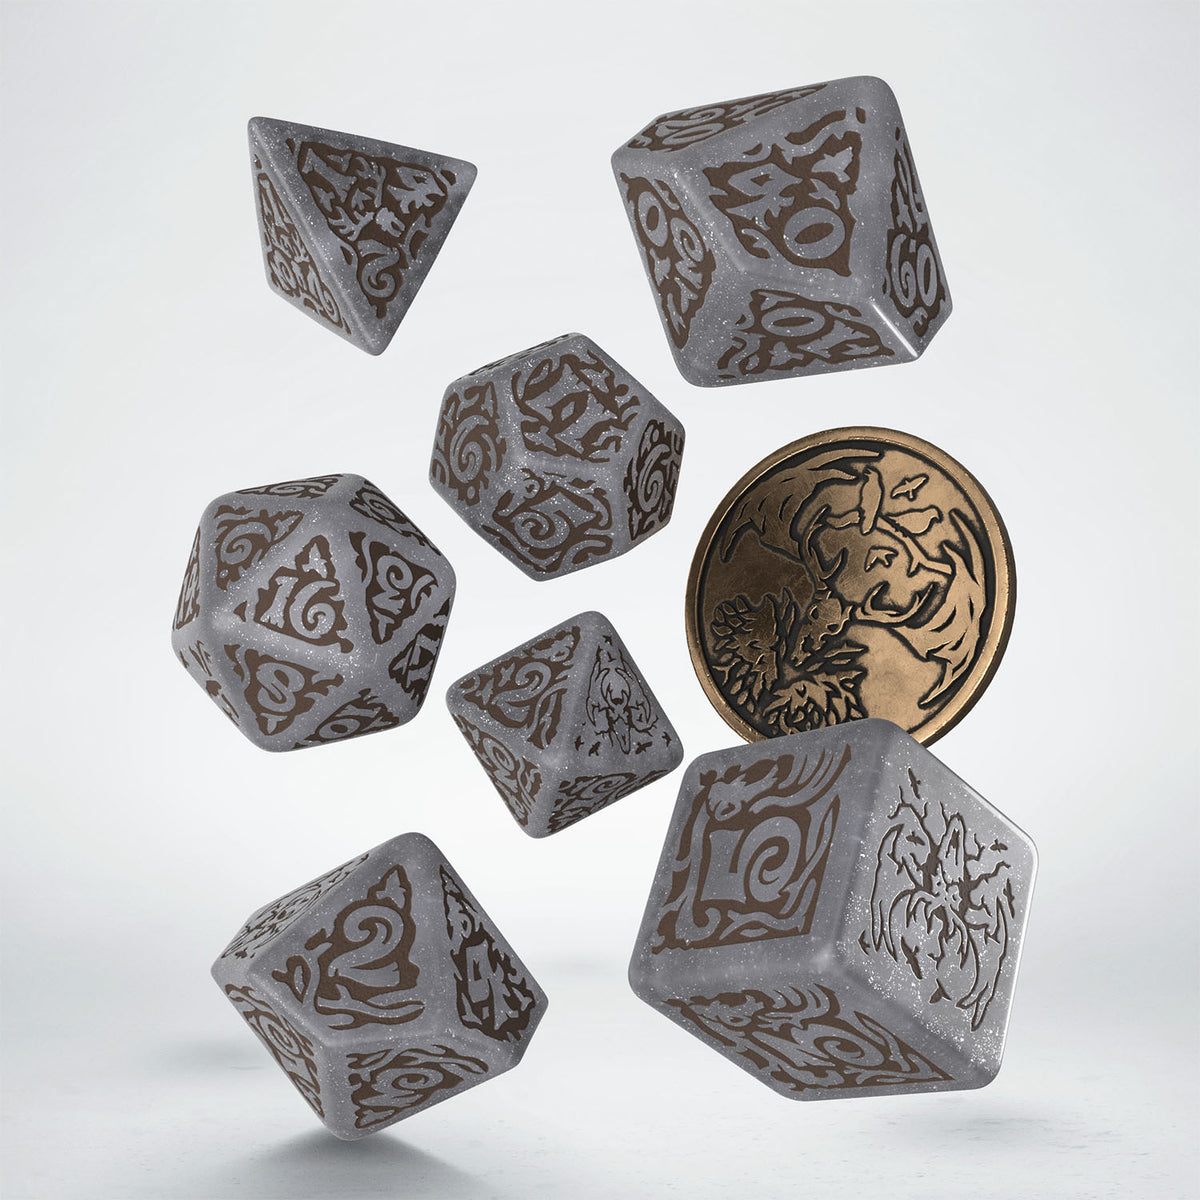 Q Workshop - The Witcher Dice Set Leshen - Shape Shifter Dice Set 7 With Coin